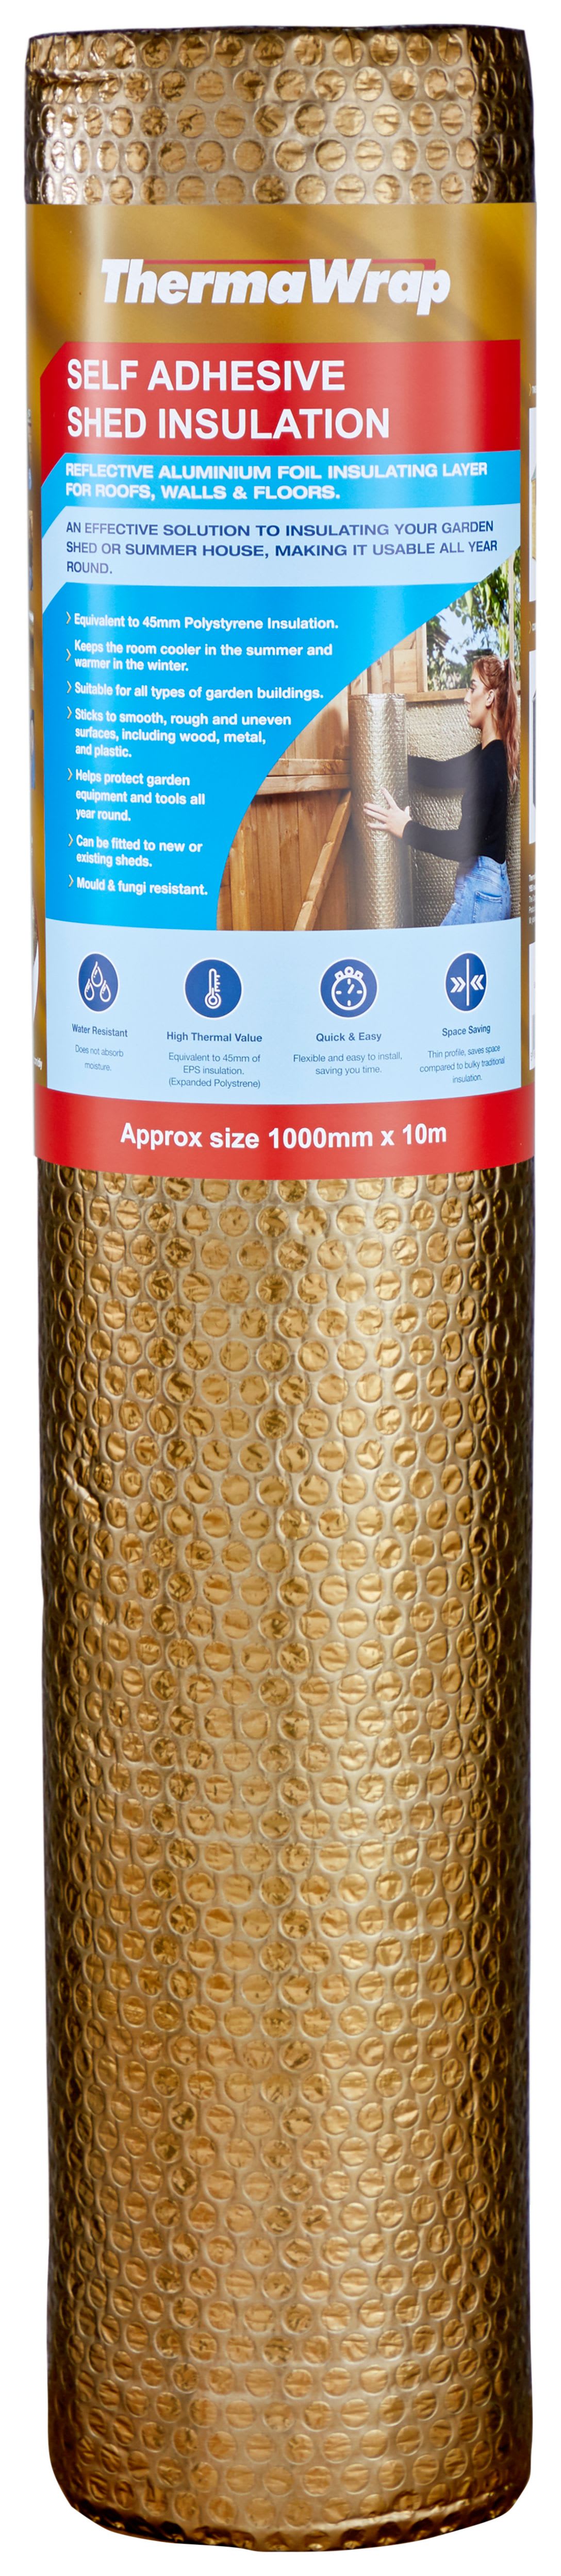 ThermaWrap Self-Adhesive Shed Insulation Roll - 1000mm x